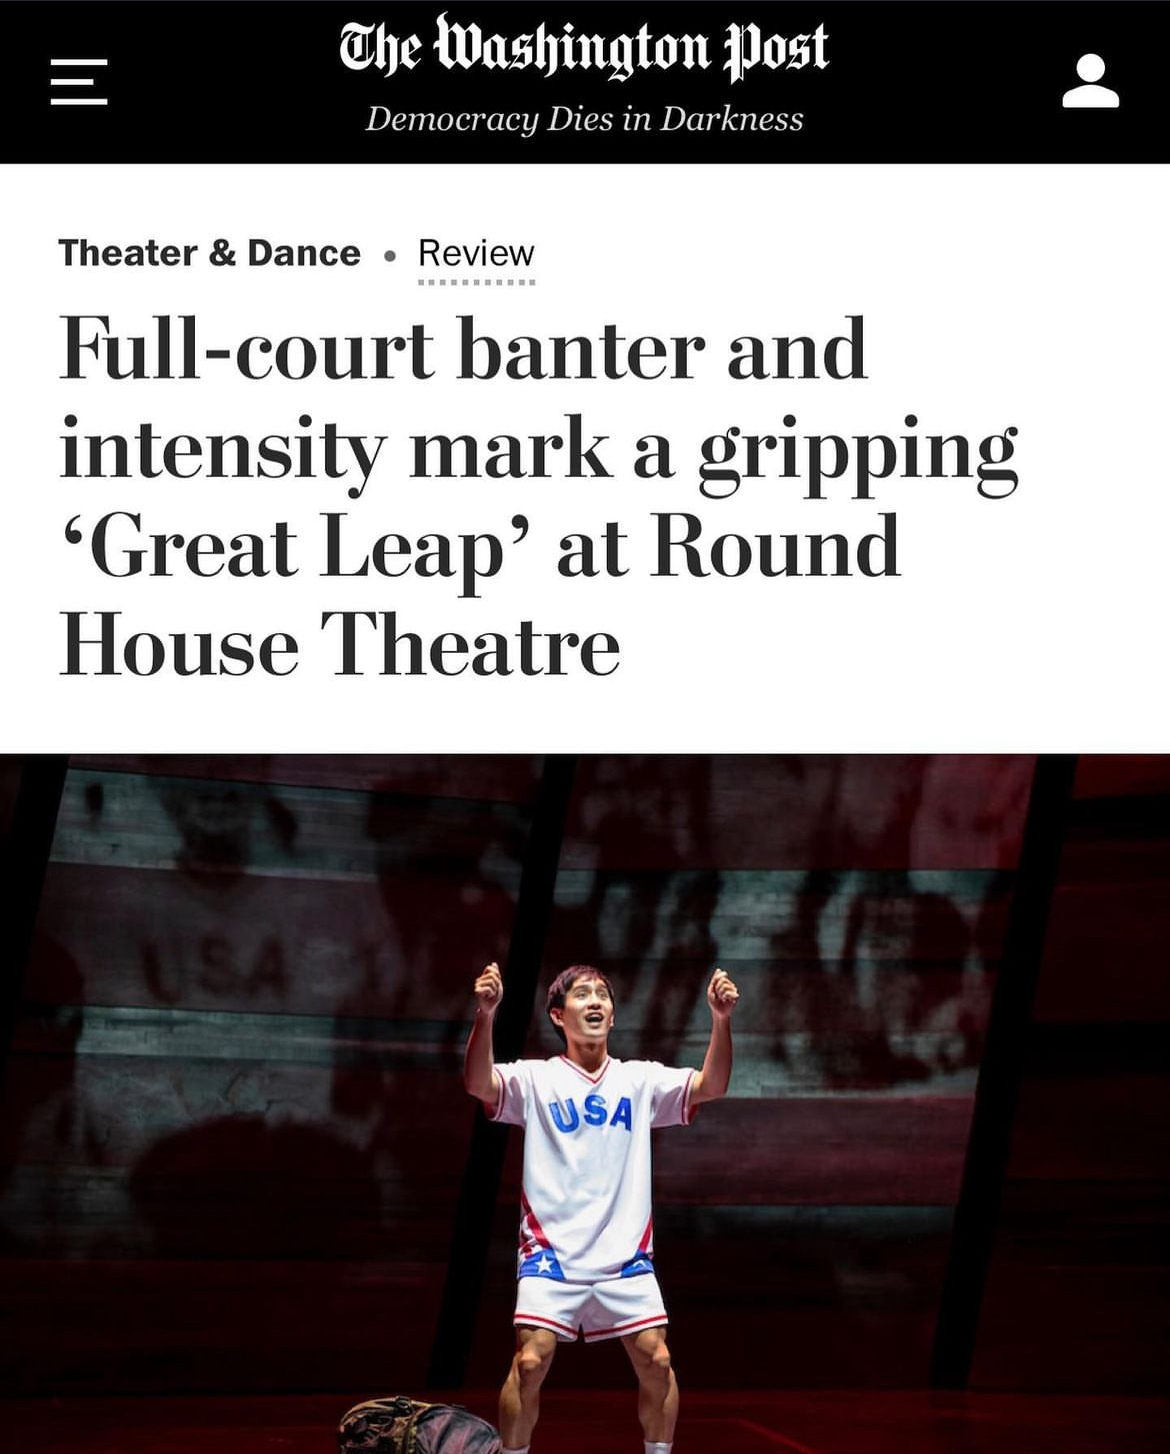 Washington Post review: Full-court banter and intensity mark a gripping ‘Great Leap’ at Round House Theatre